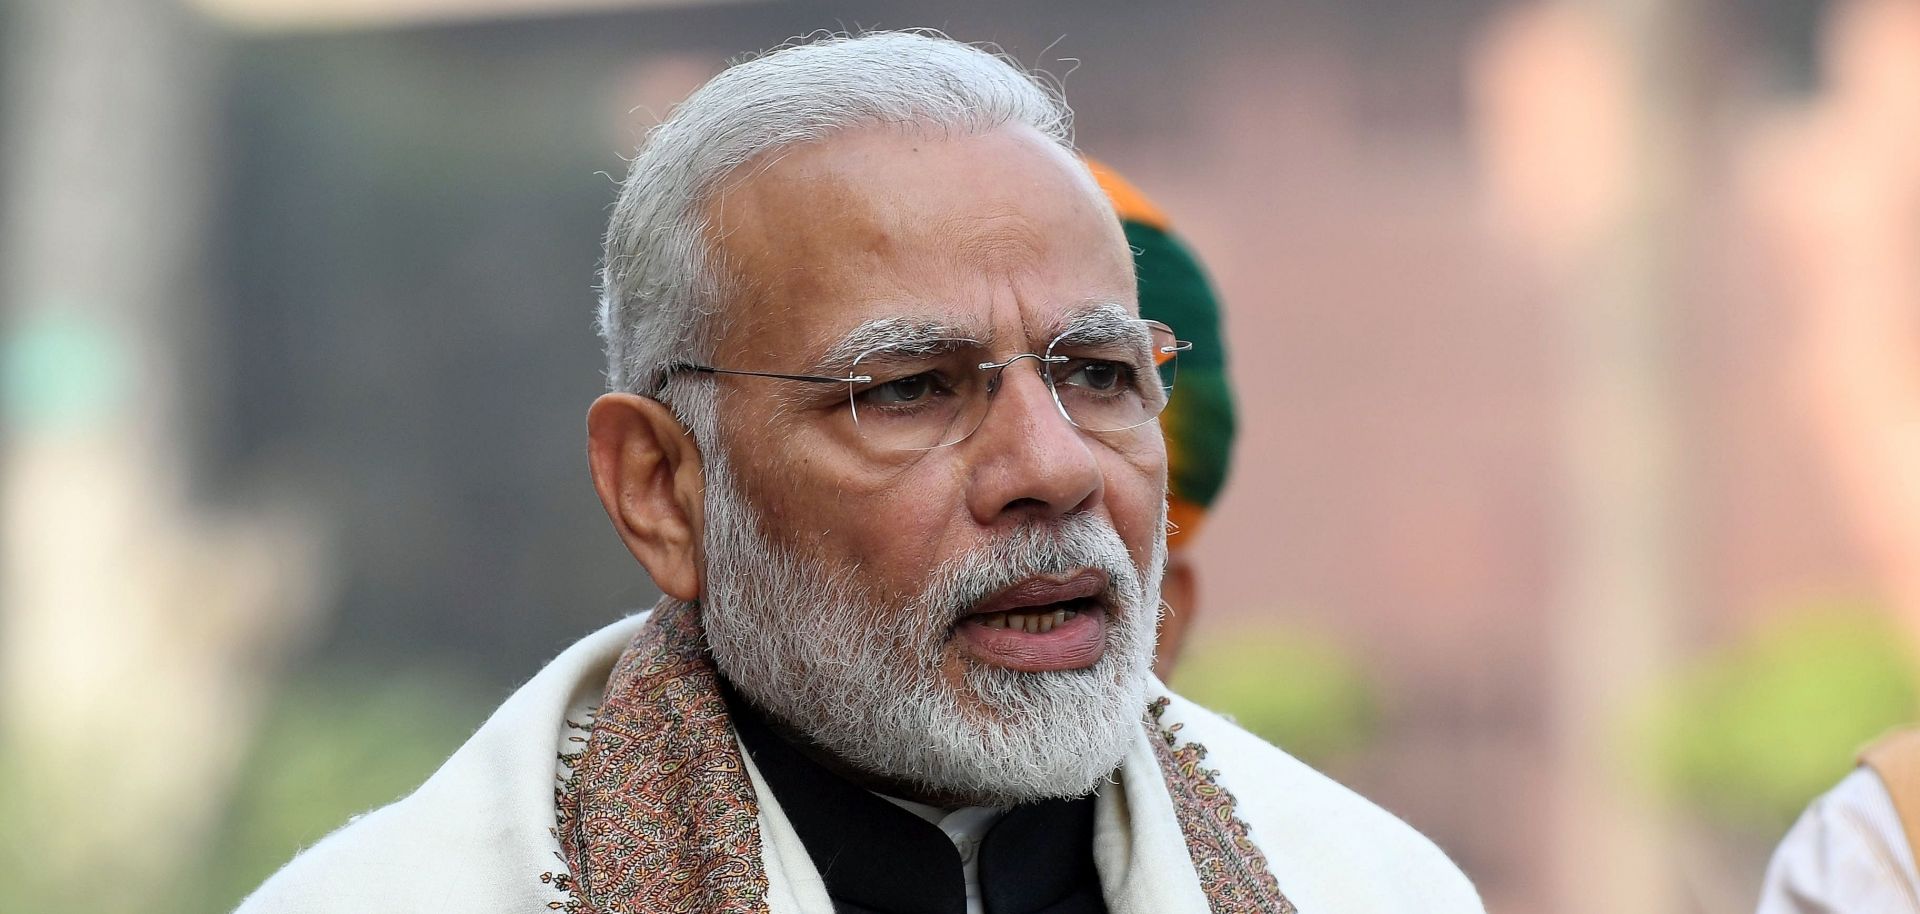 Indian Prime Minister Narendra Modi speaks to reporters before attending a budget session in Parliament on Jan. 29.